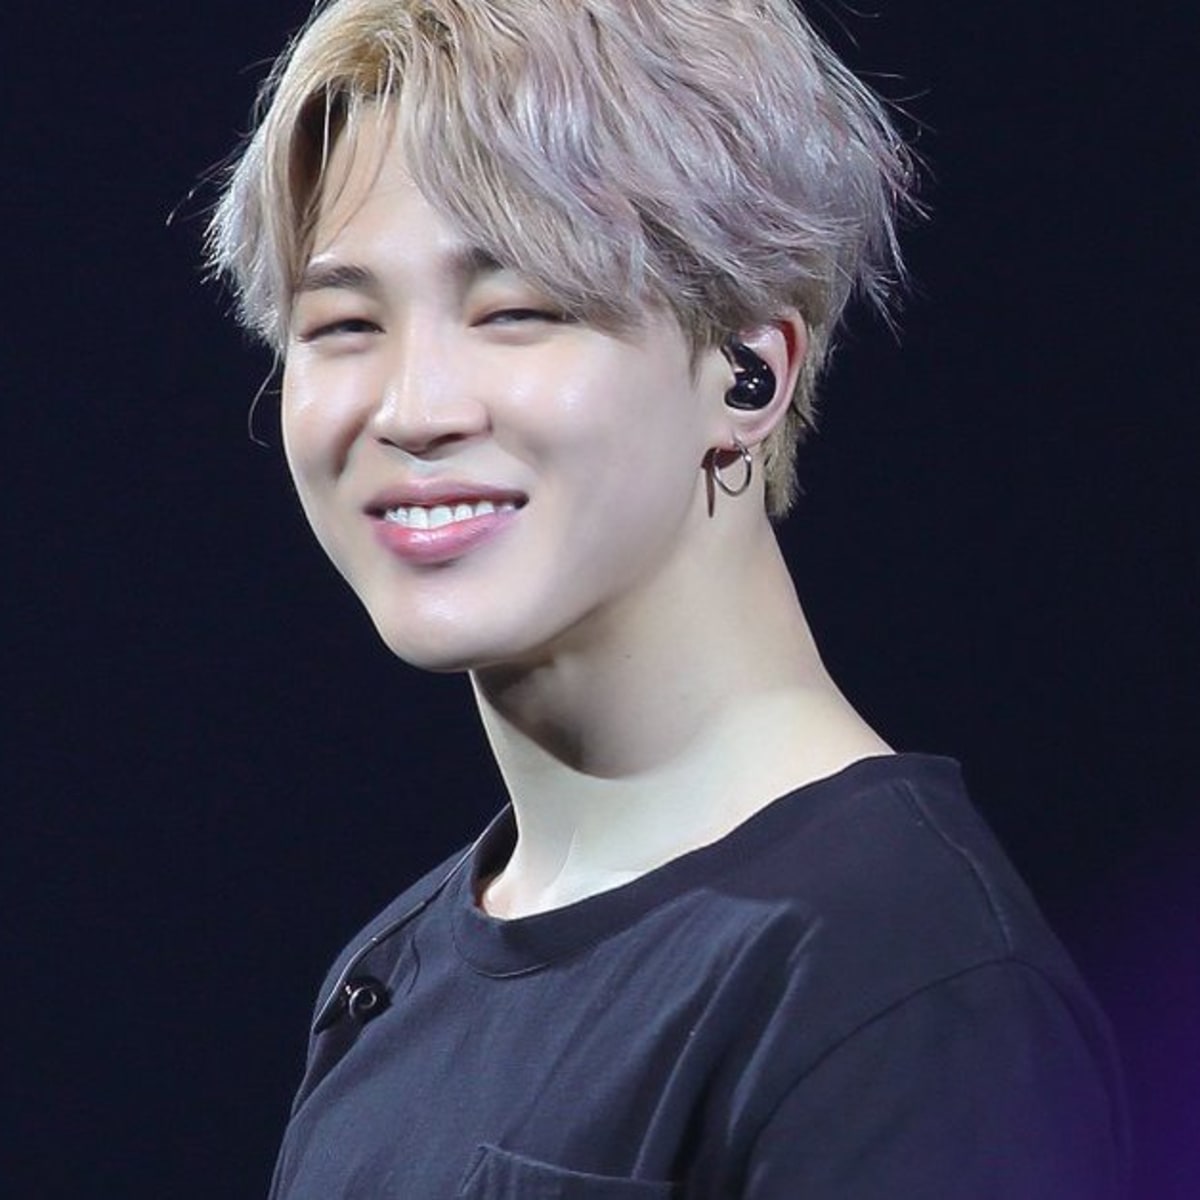 Celebrate Jimtober properly with these cute photos of BTS's Jimin ...